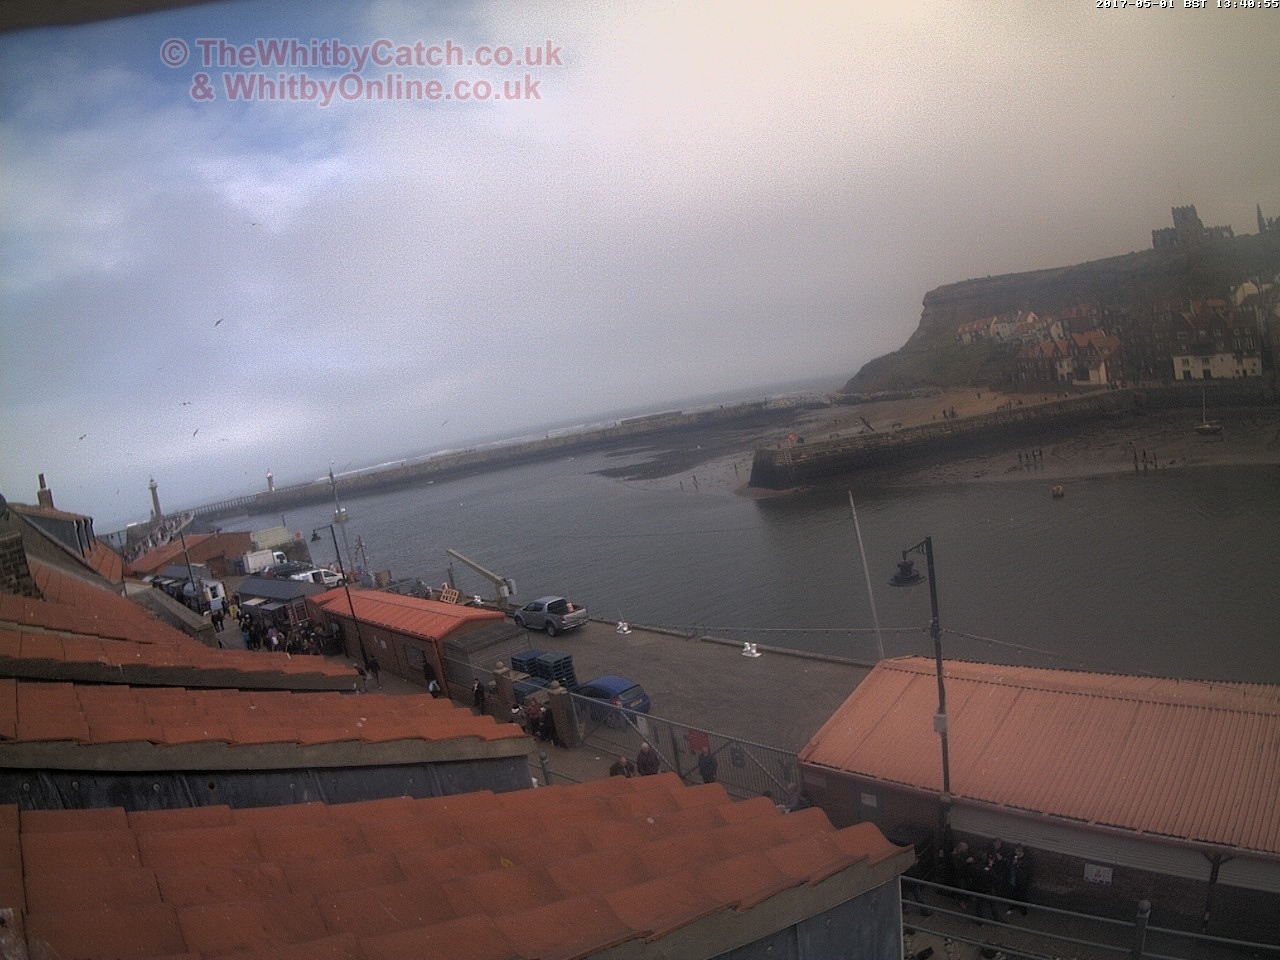 Whitby Mon 1st May 2017 13:41.